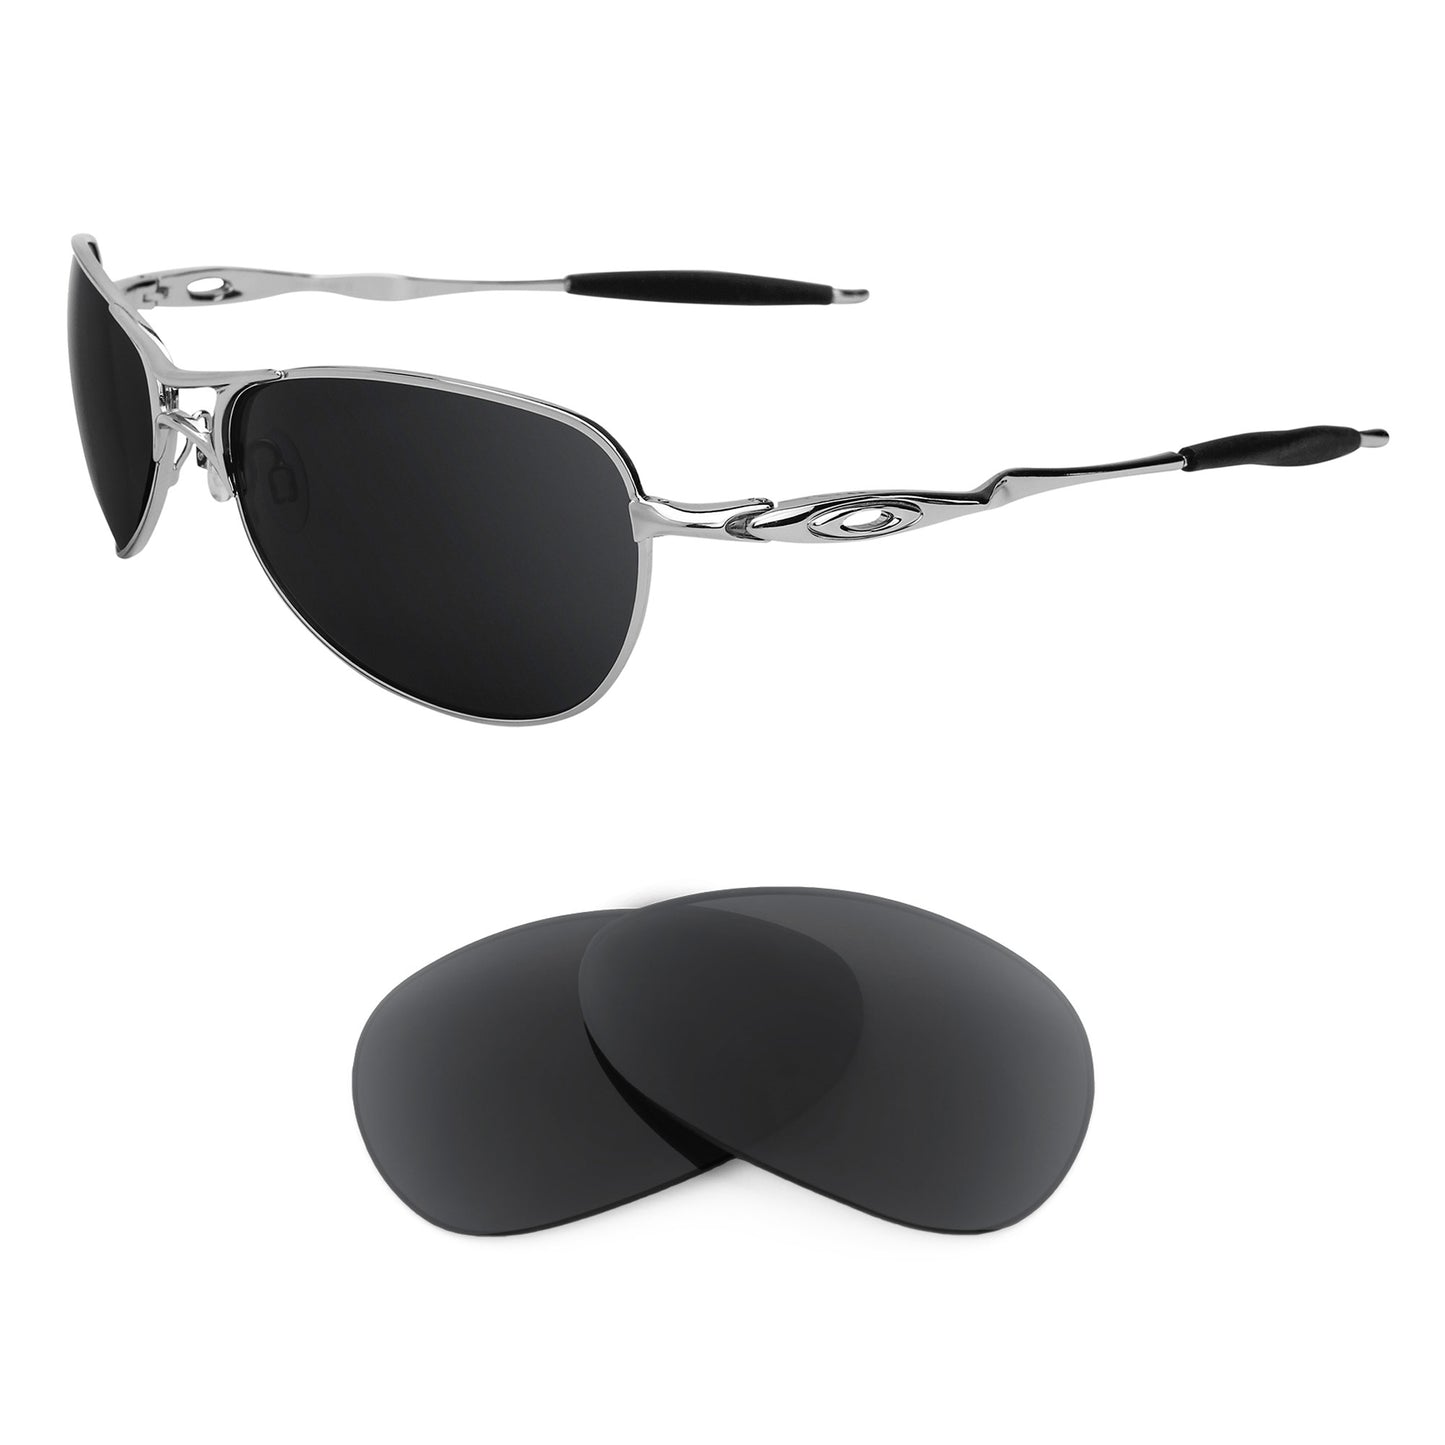 Oakley Crosshair S sunglasses with replacement lenses